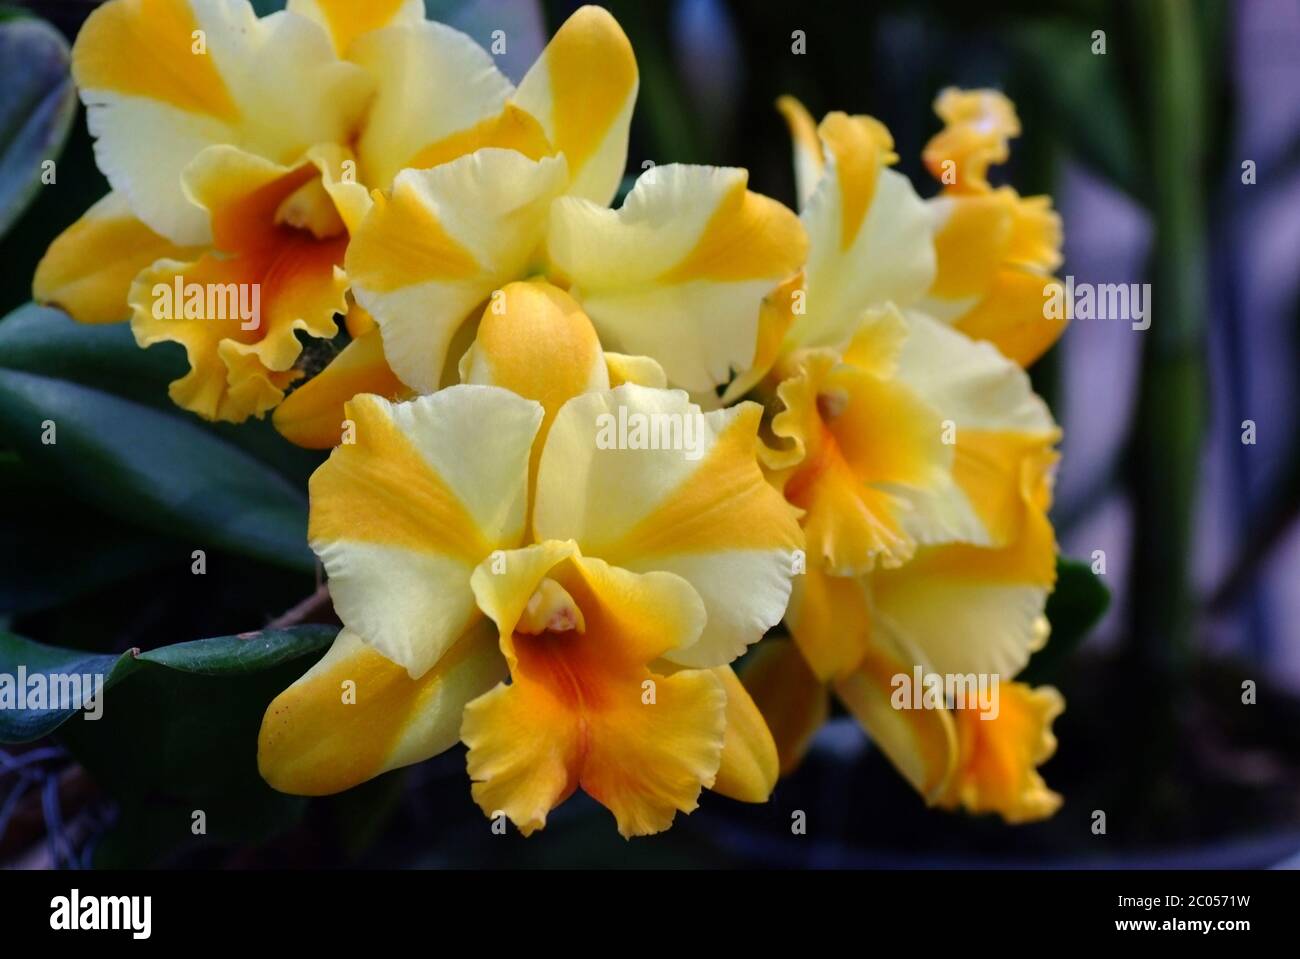 Blooming White Yellow Cattleya hybrids orchid Stock Photo